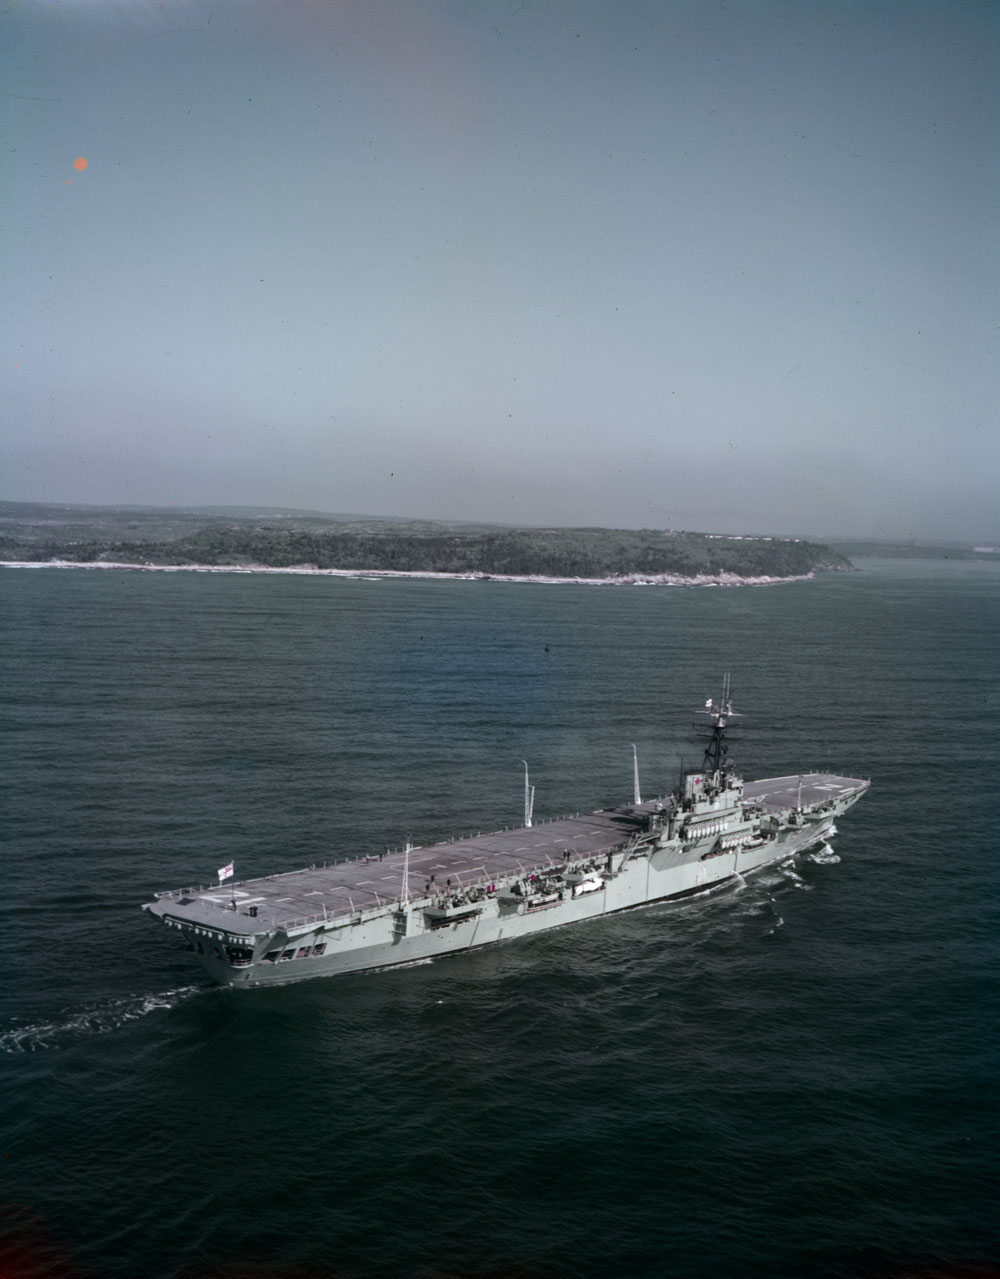 HMCS Magnificent from air stbd side June 1954. (National Archives of Canada)